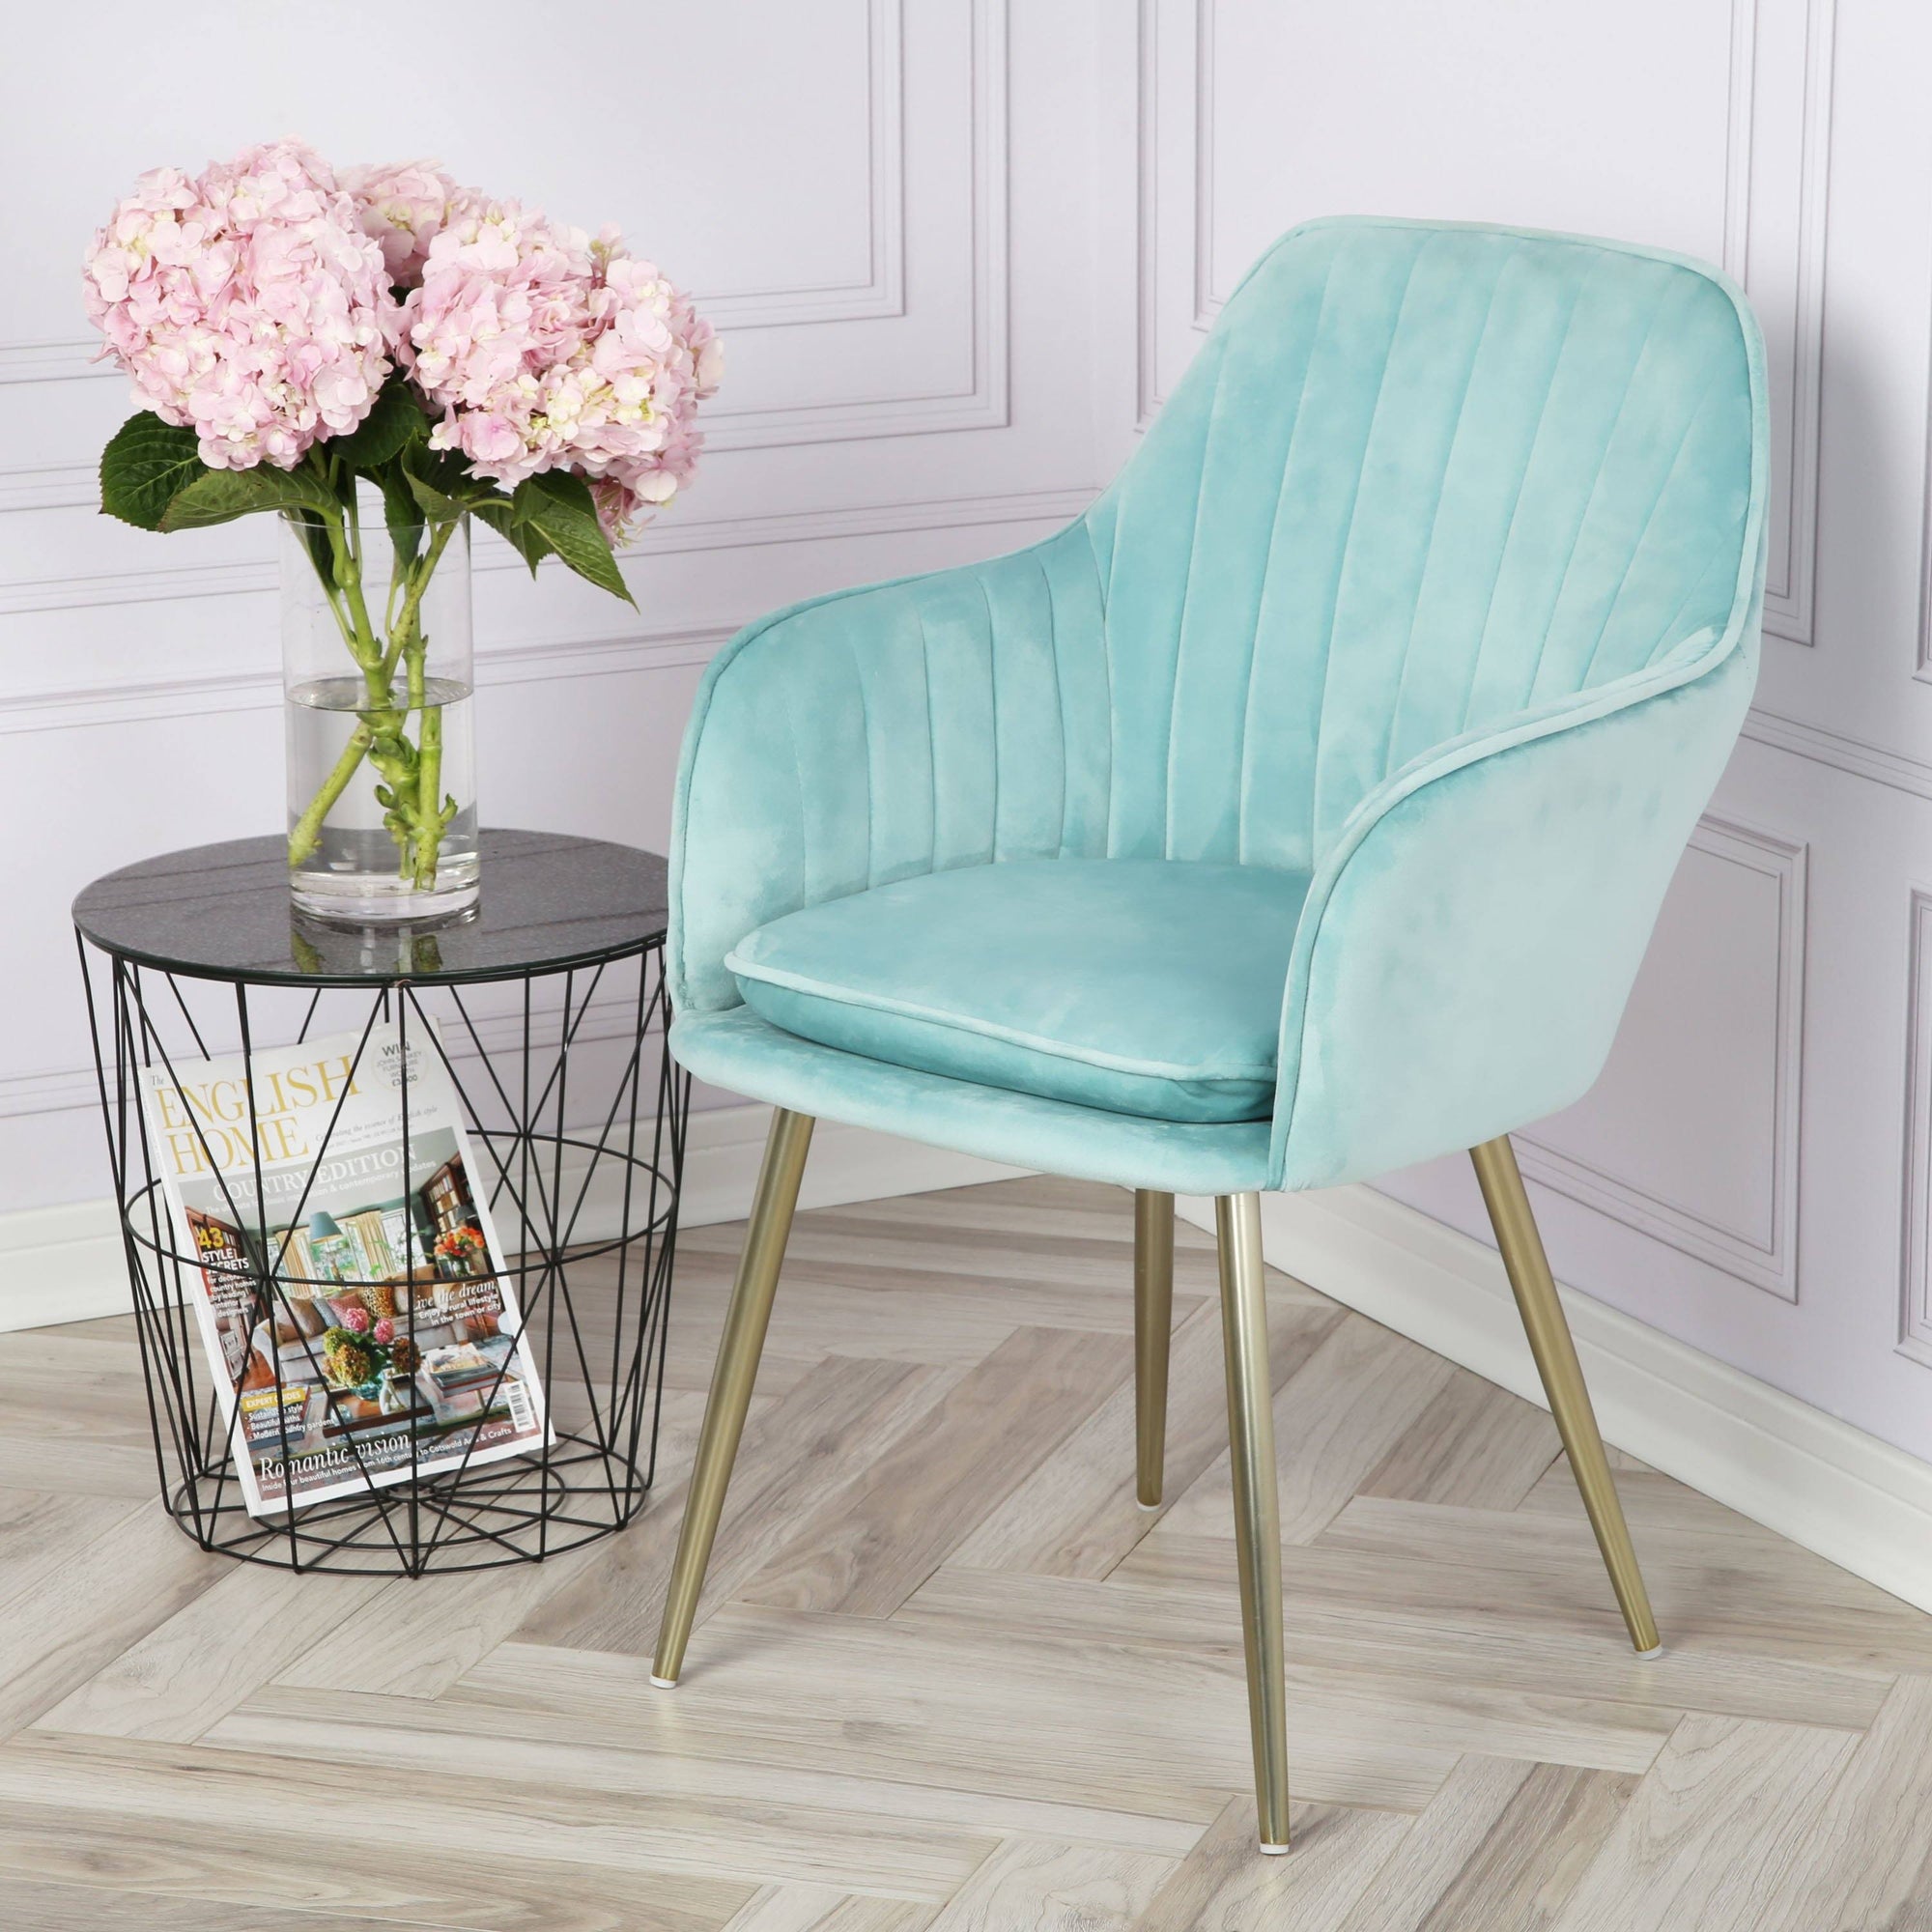 Muse accent chair – light blue with gold legs - Laura James